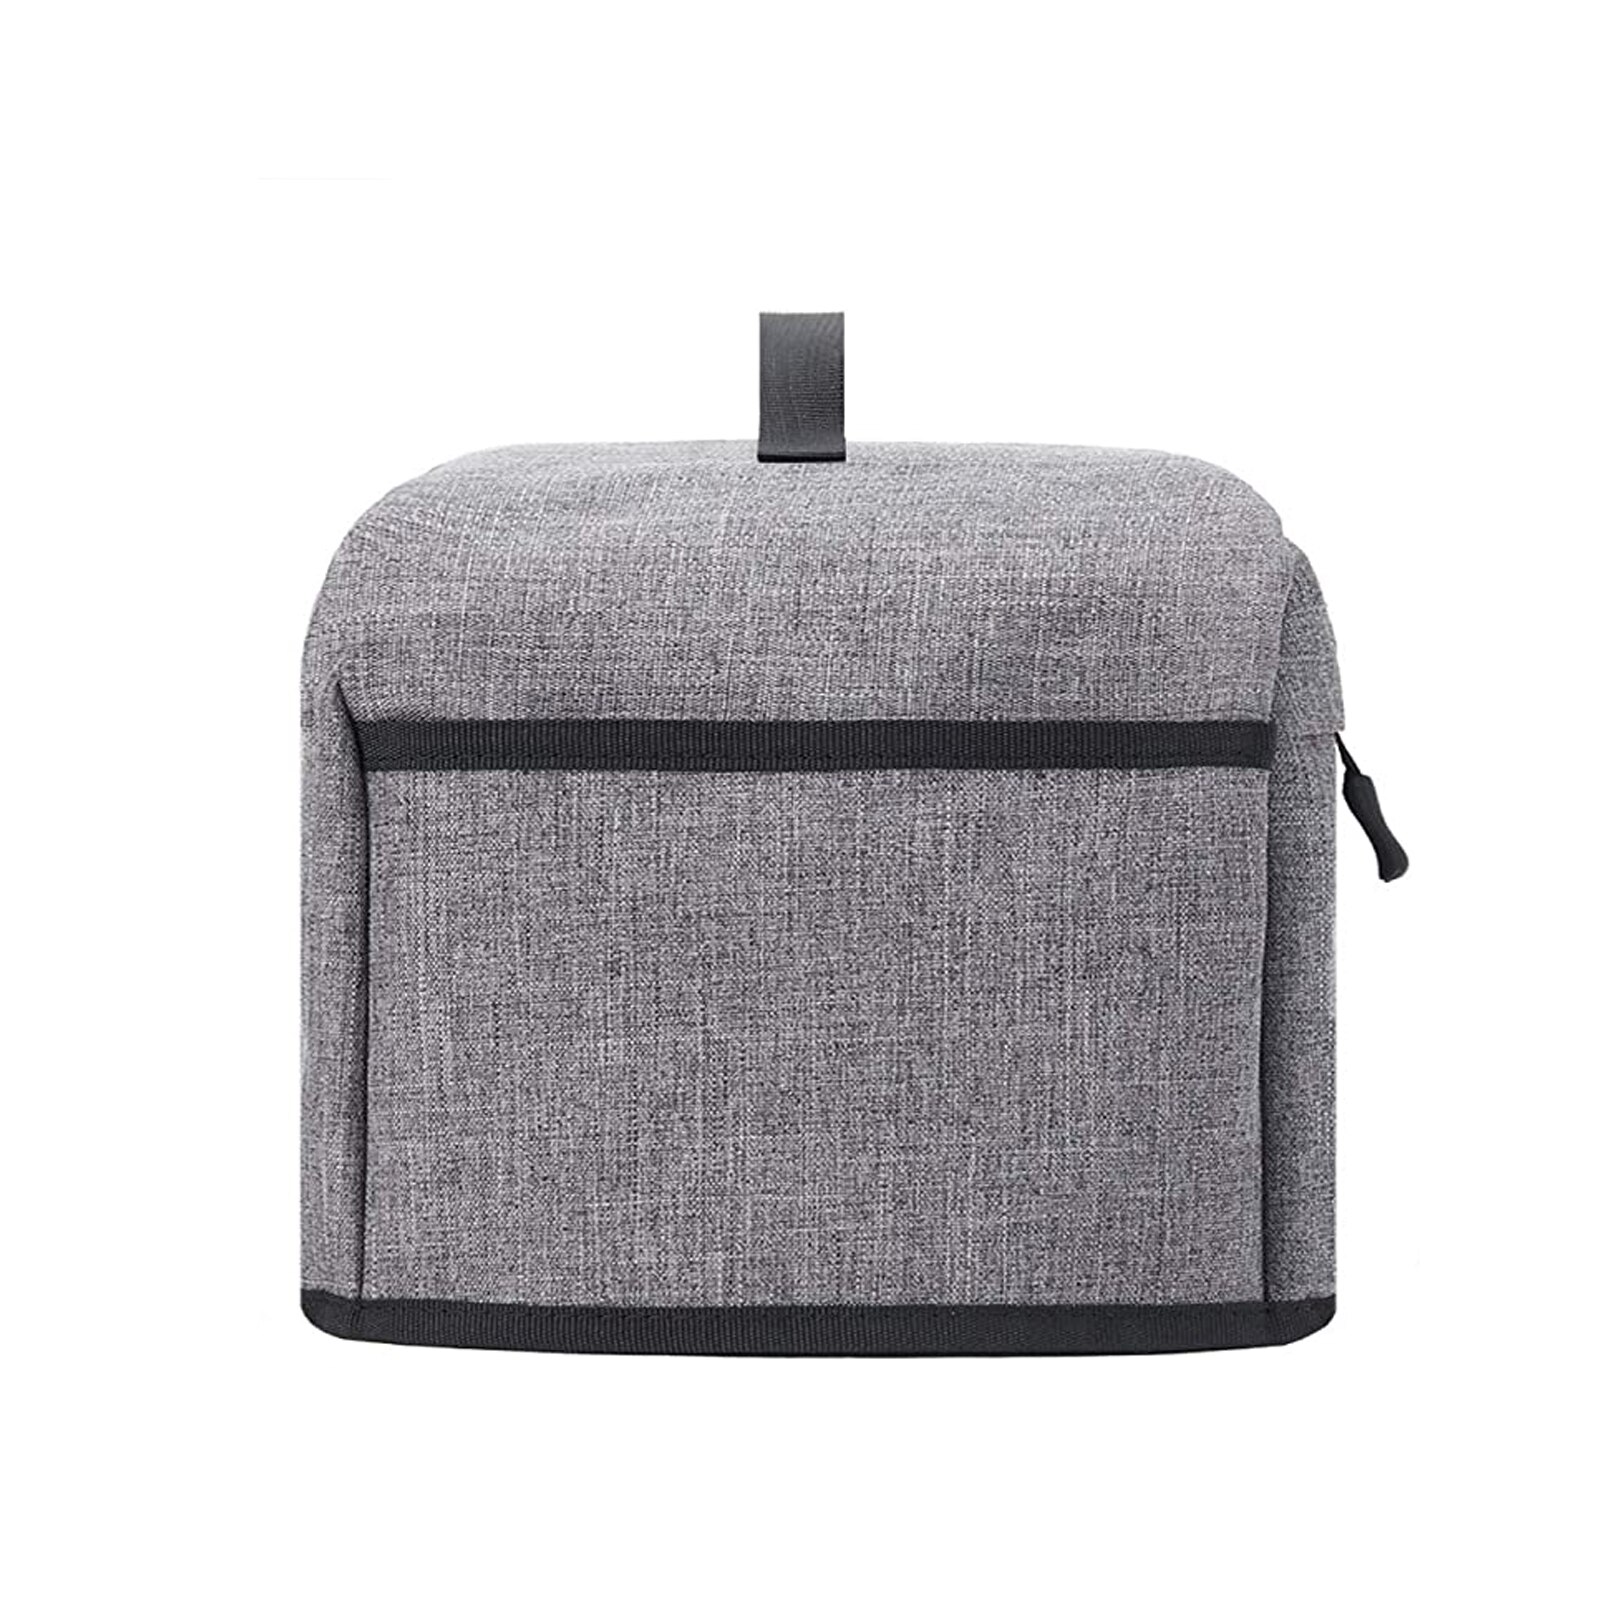 Toaster Dust Cover Anti-dust 4 Slice Toaster Covers with Zipper and Pockets Kitchen Small Appliance Cover with Handle